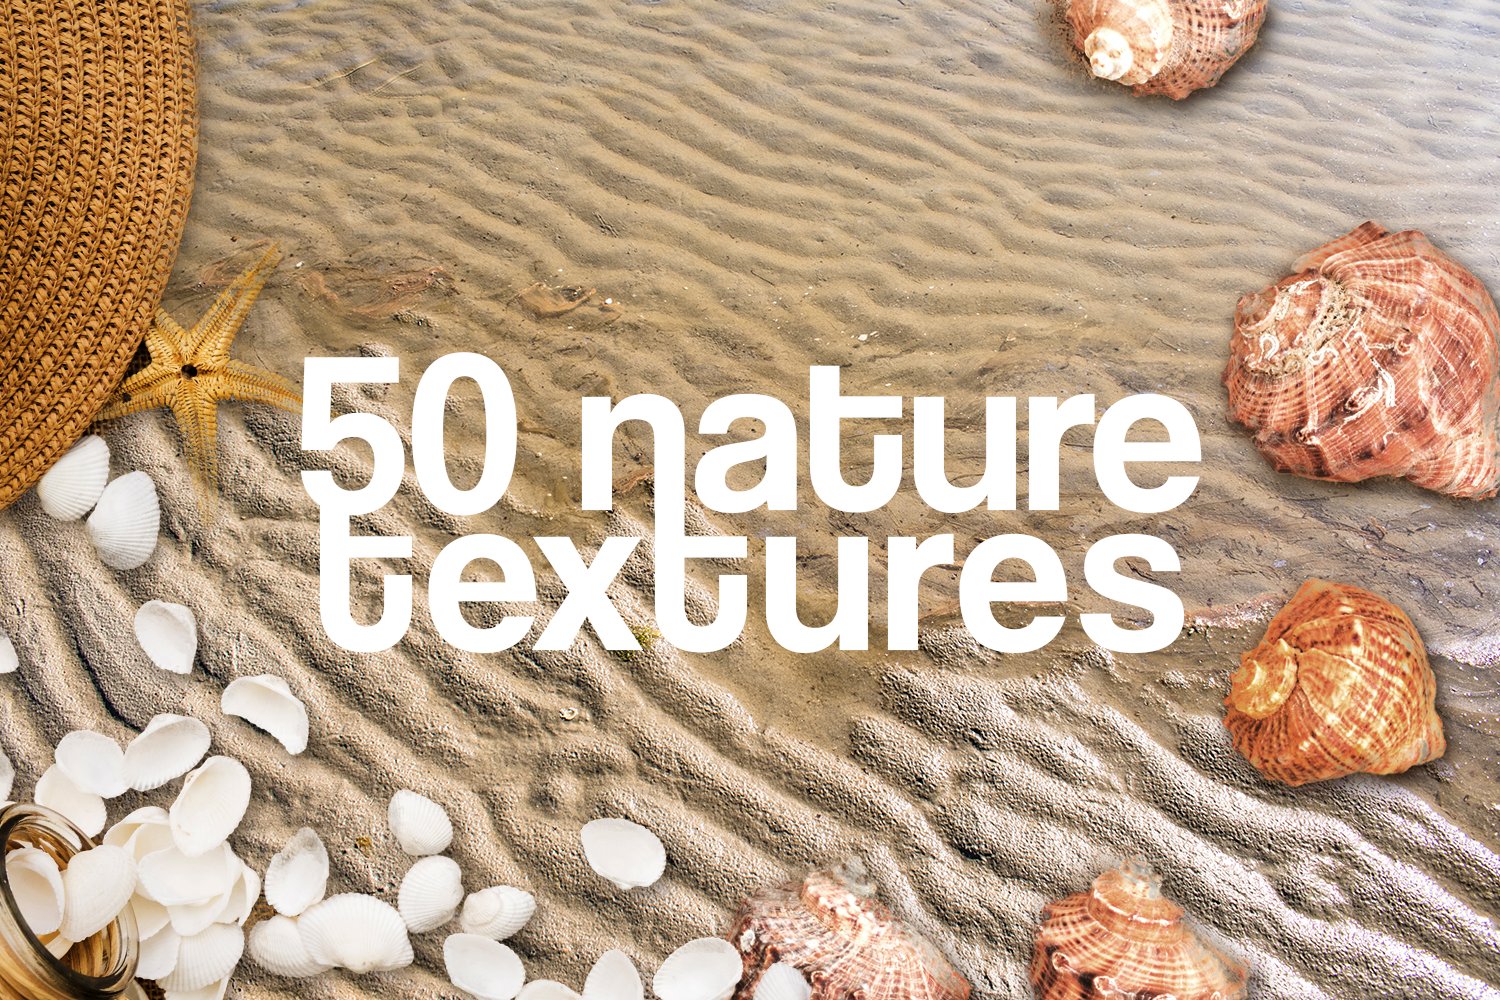 Nature Photoshop textures cover image.